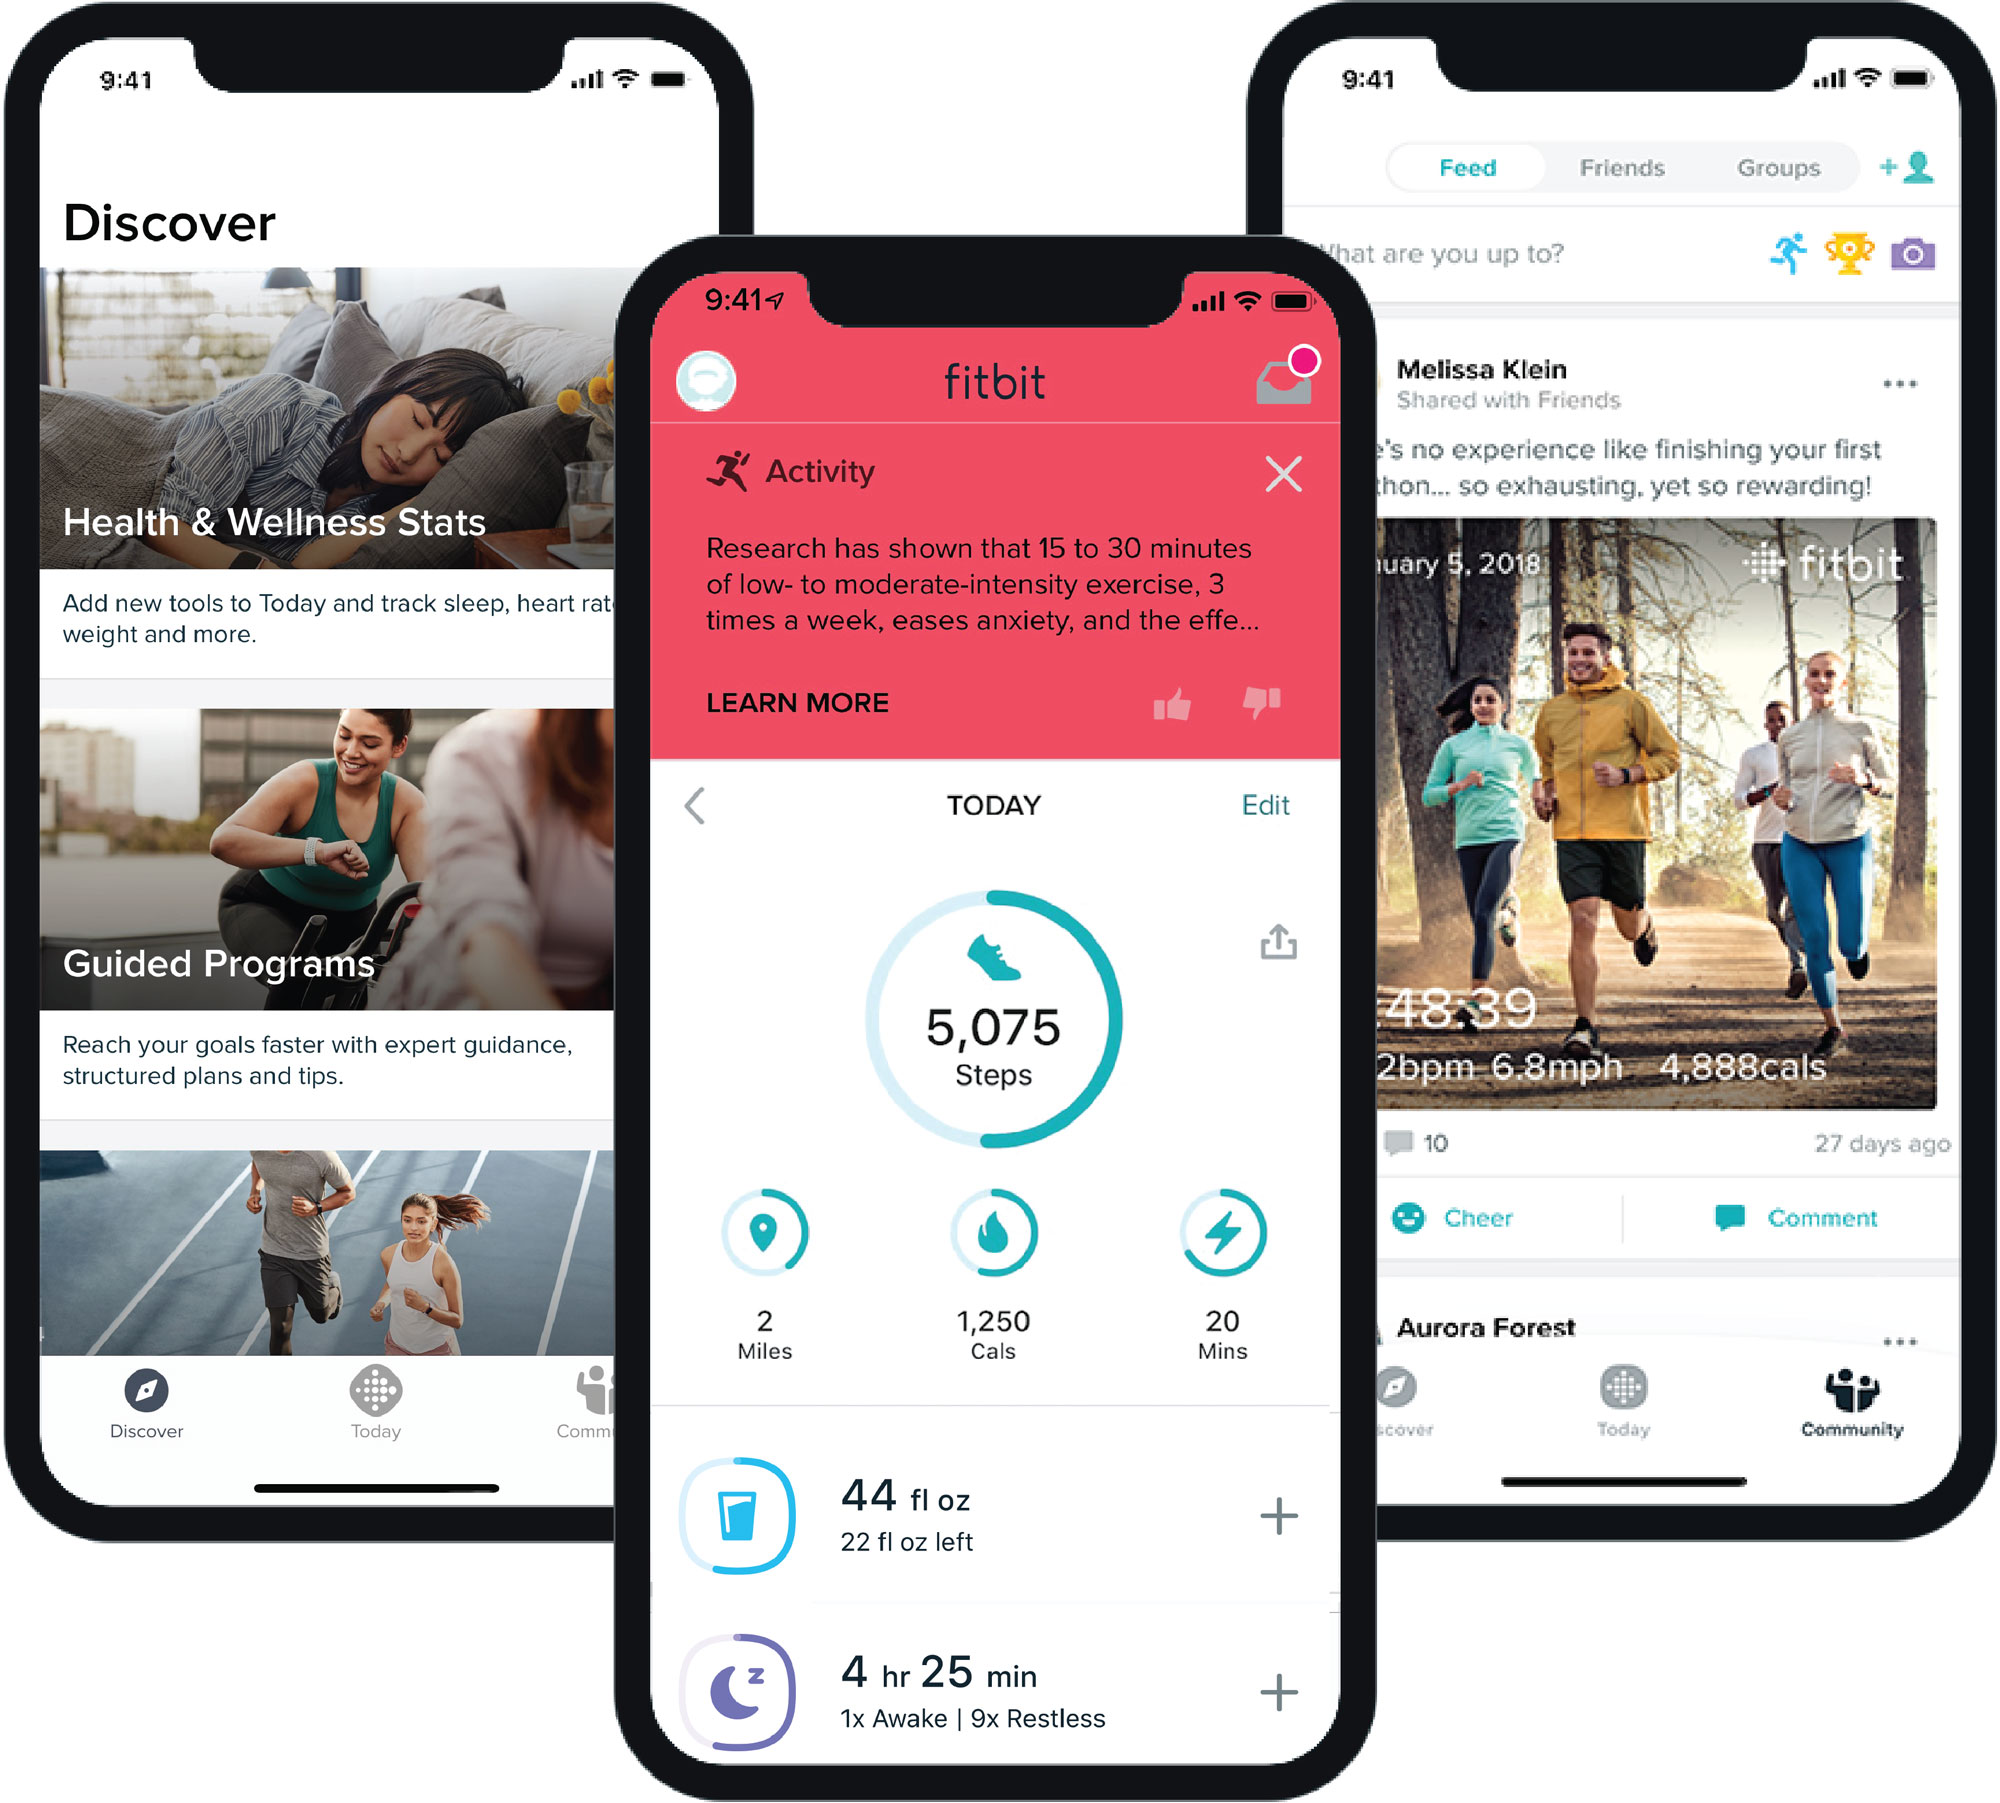 fitbit app play store